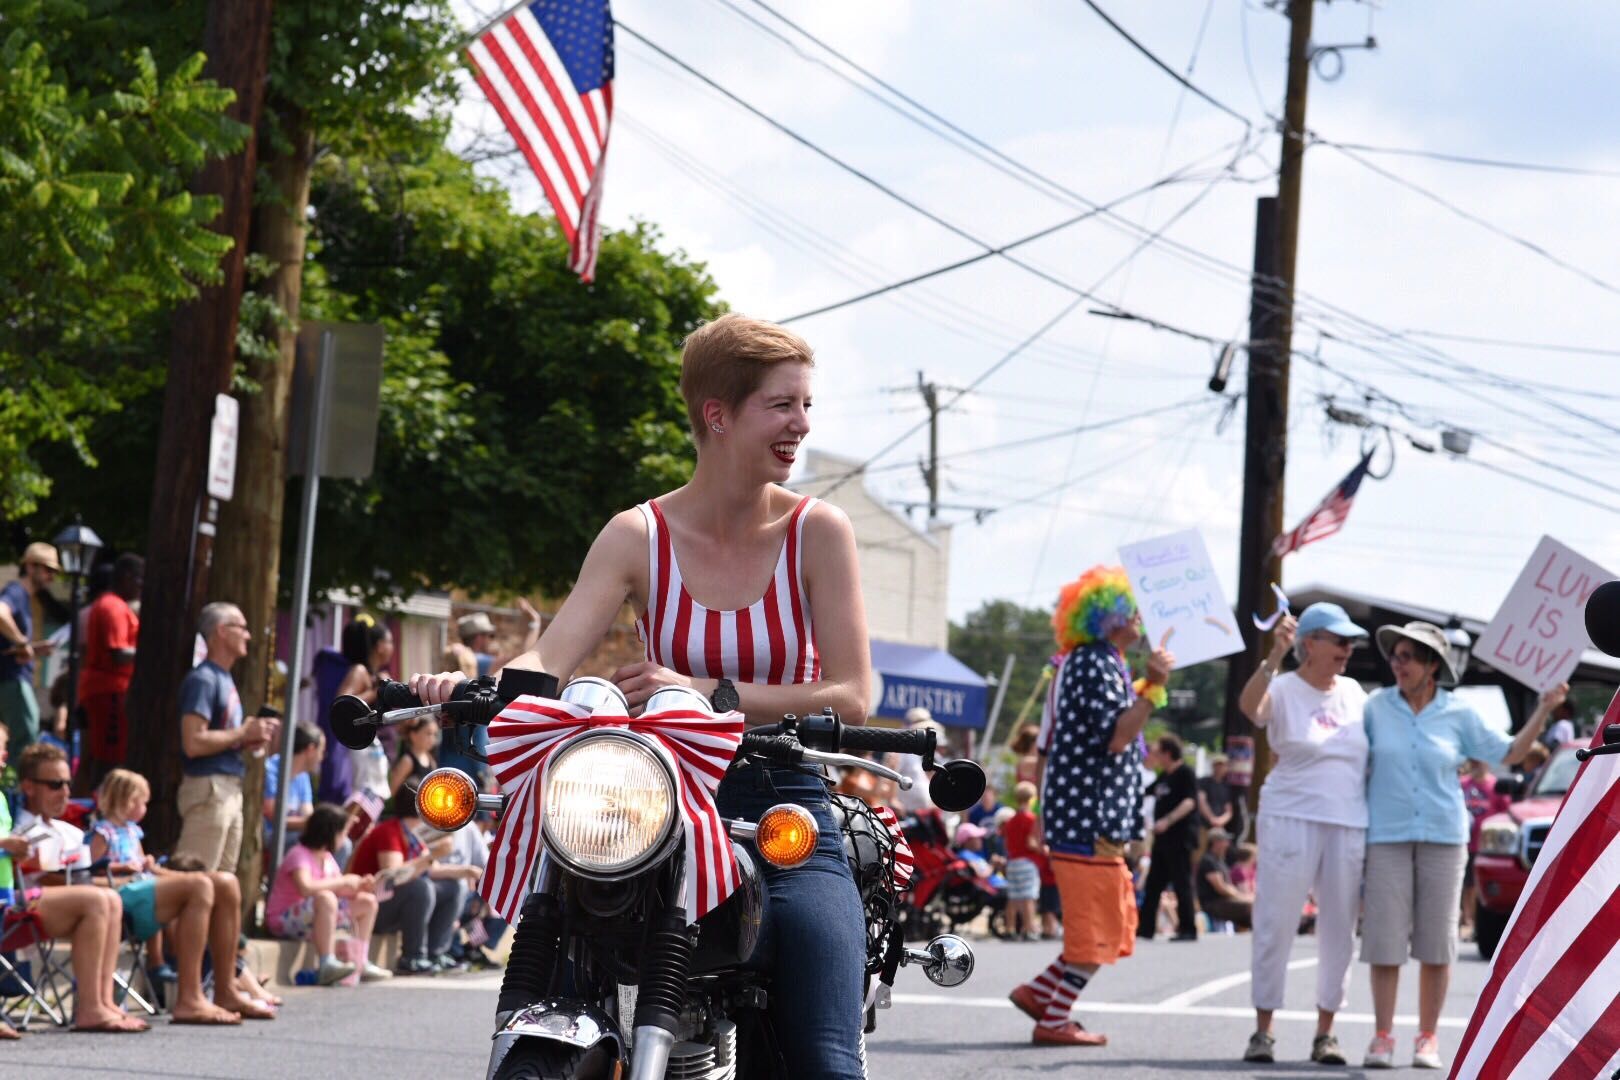 The Litas of Washington DC were represented in the Takoma Park parade. The group promotes motorcycle riding for women. (WTOP/Kate Ryan)